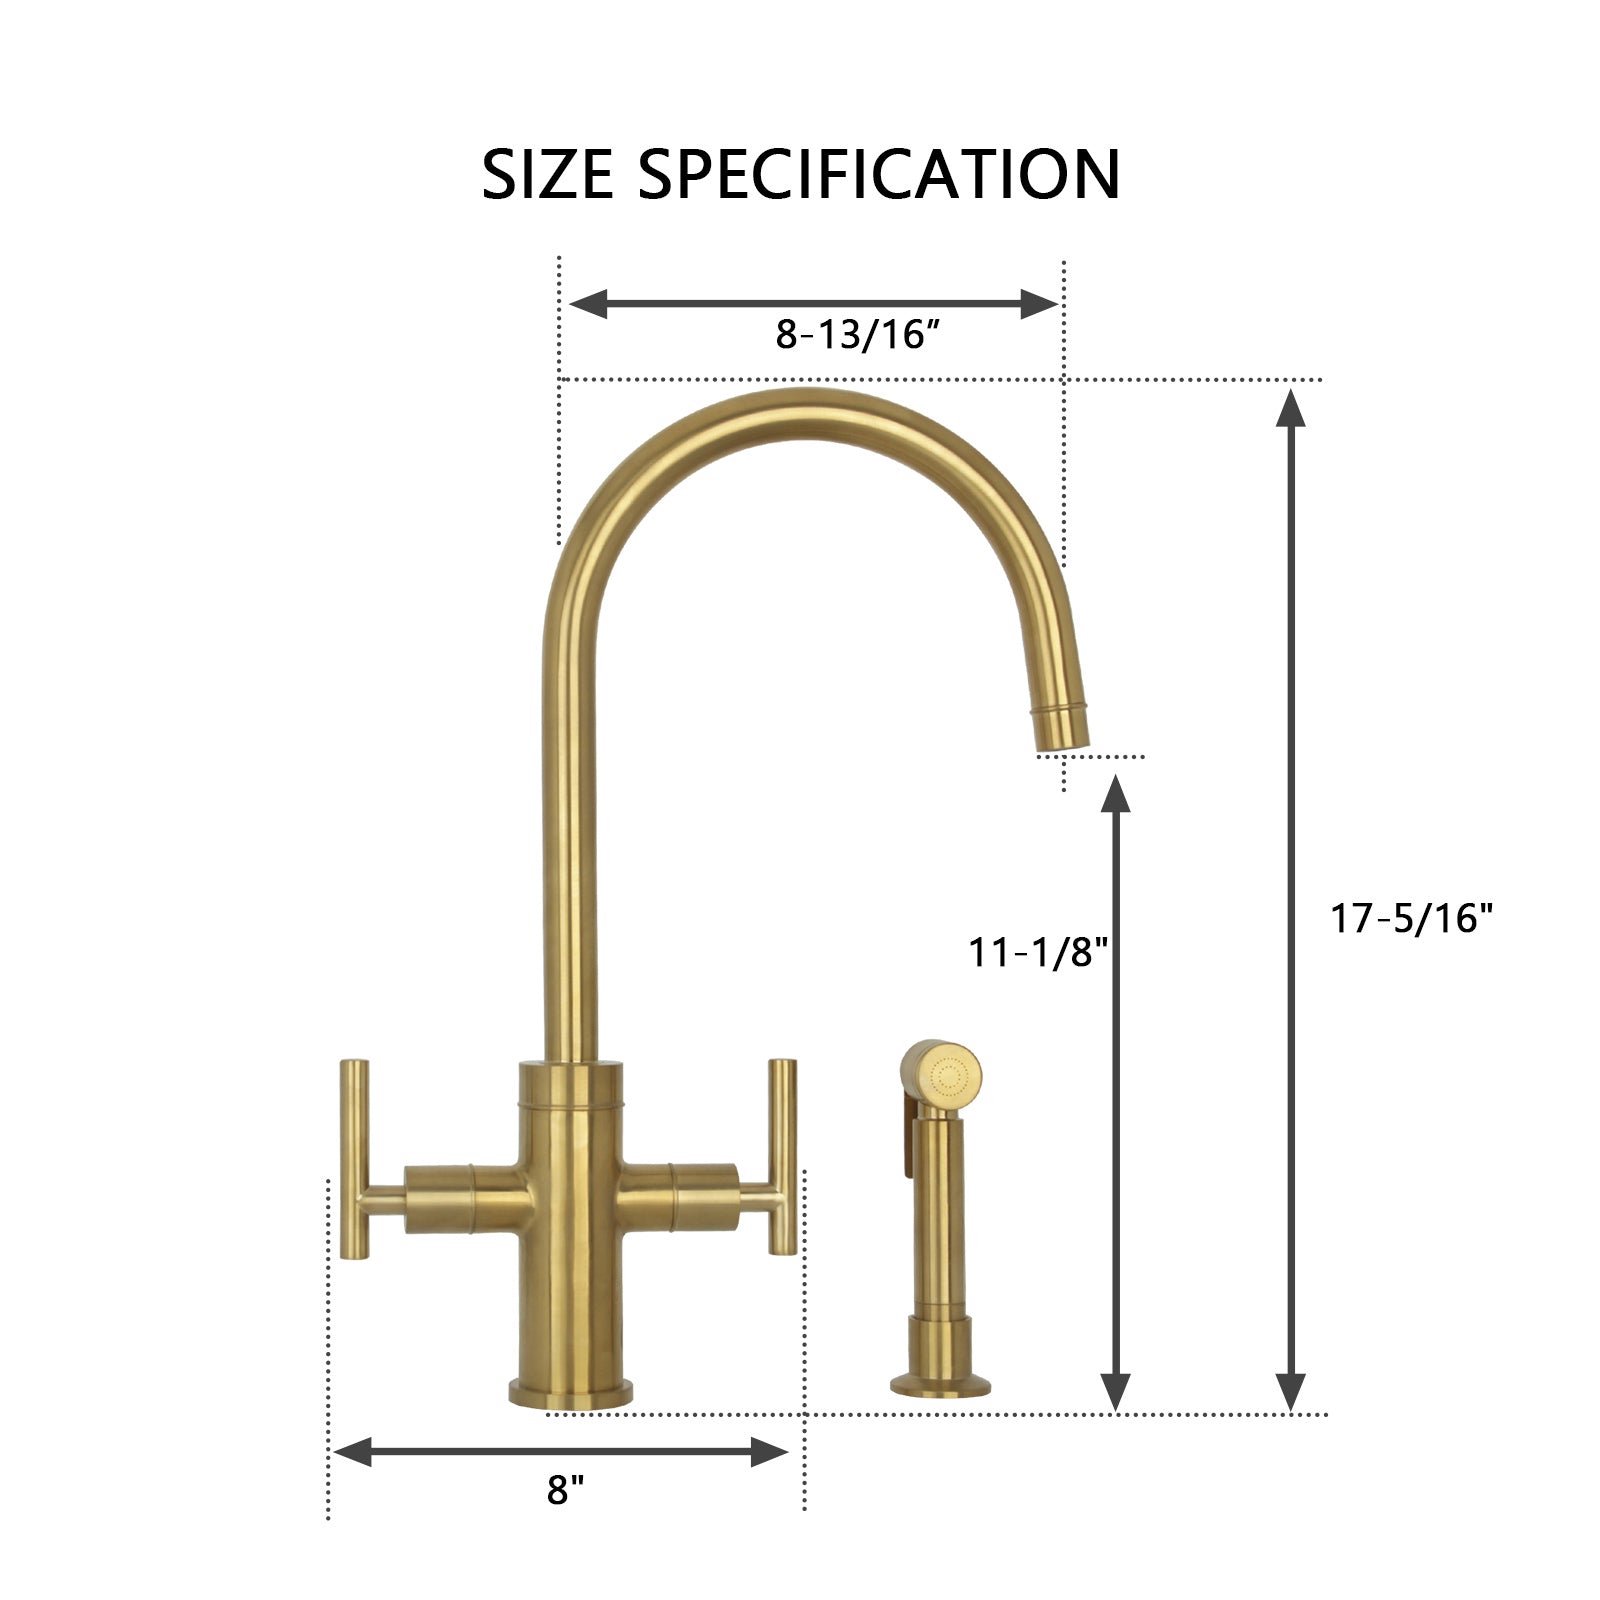 Two-Handle Brushed Gold Widespread Kitchen Faucet with Side Sprayer-AK96766-BTG